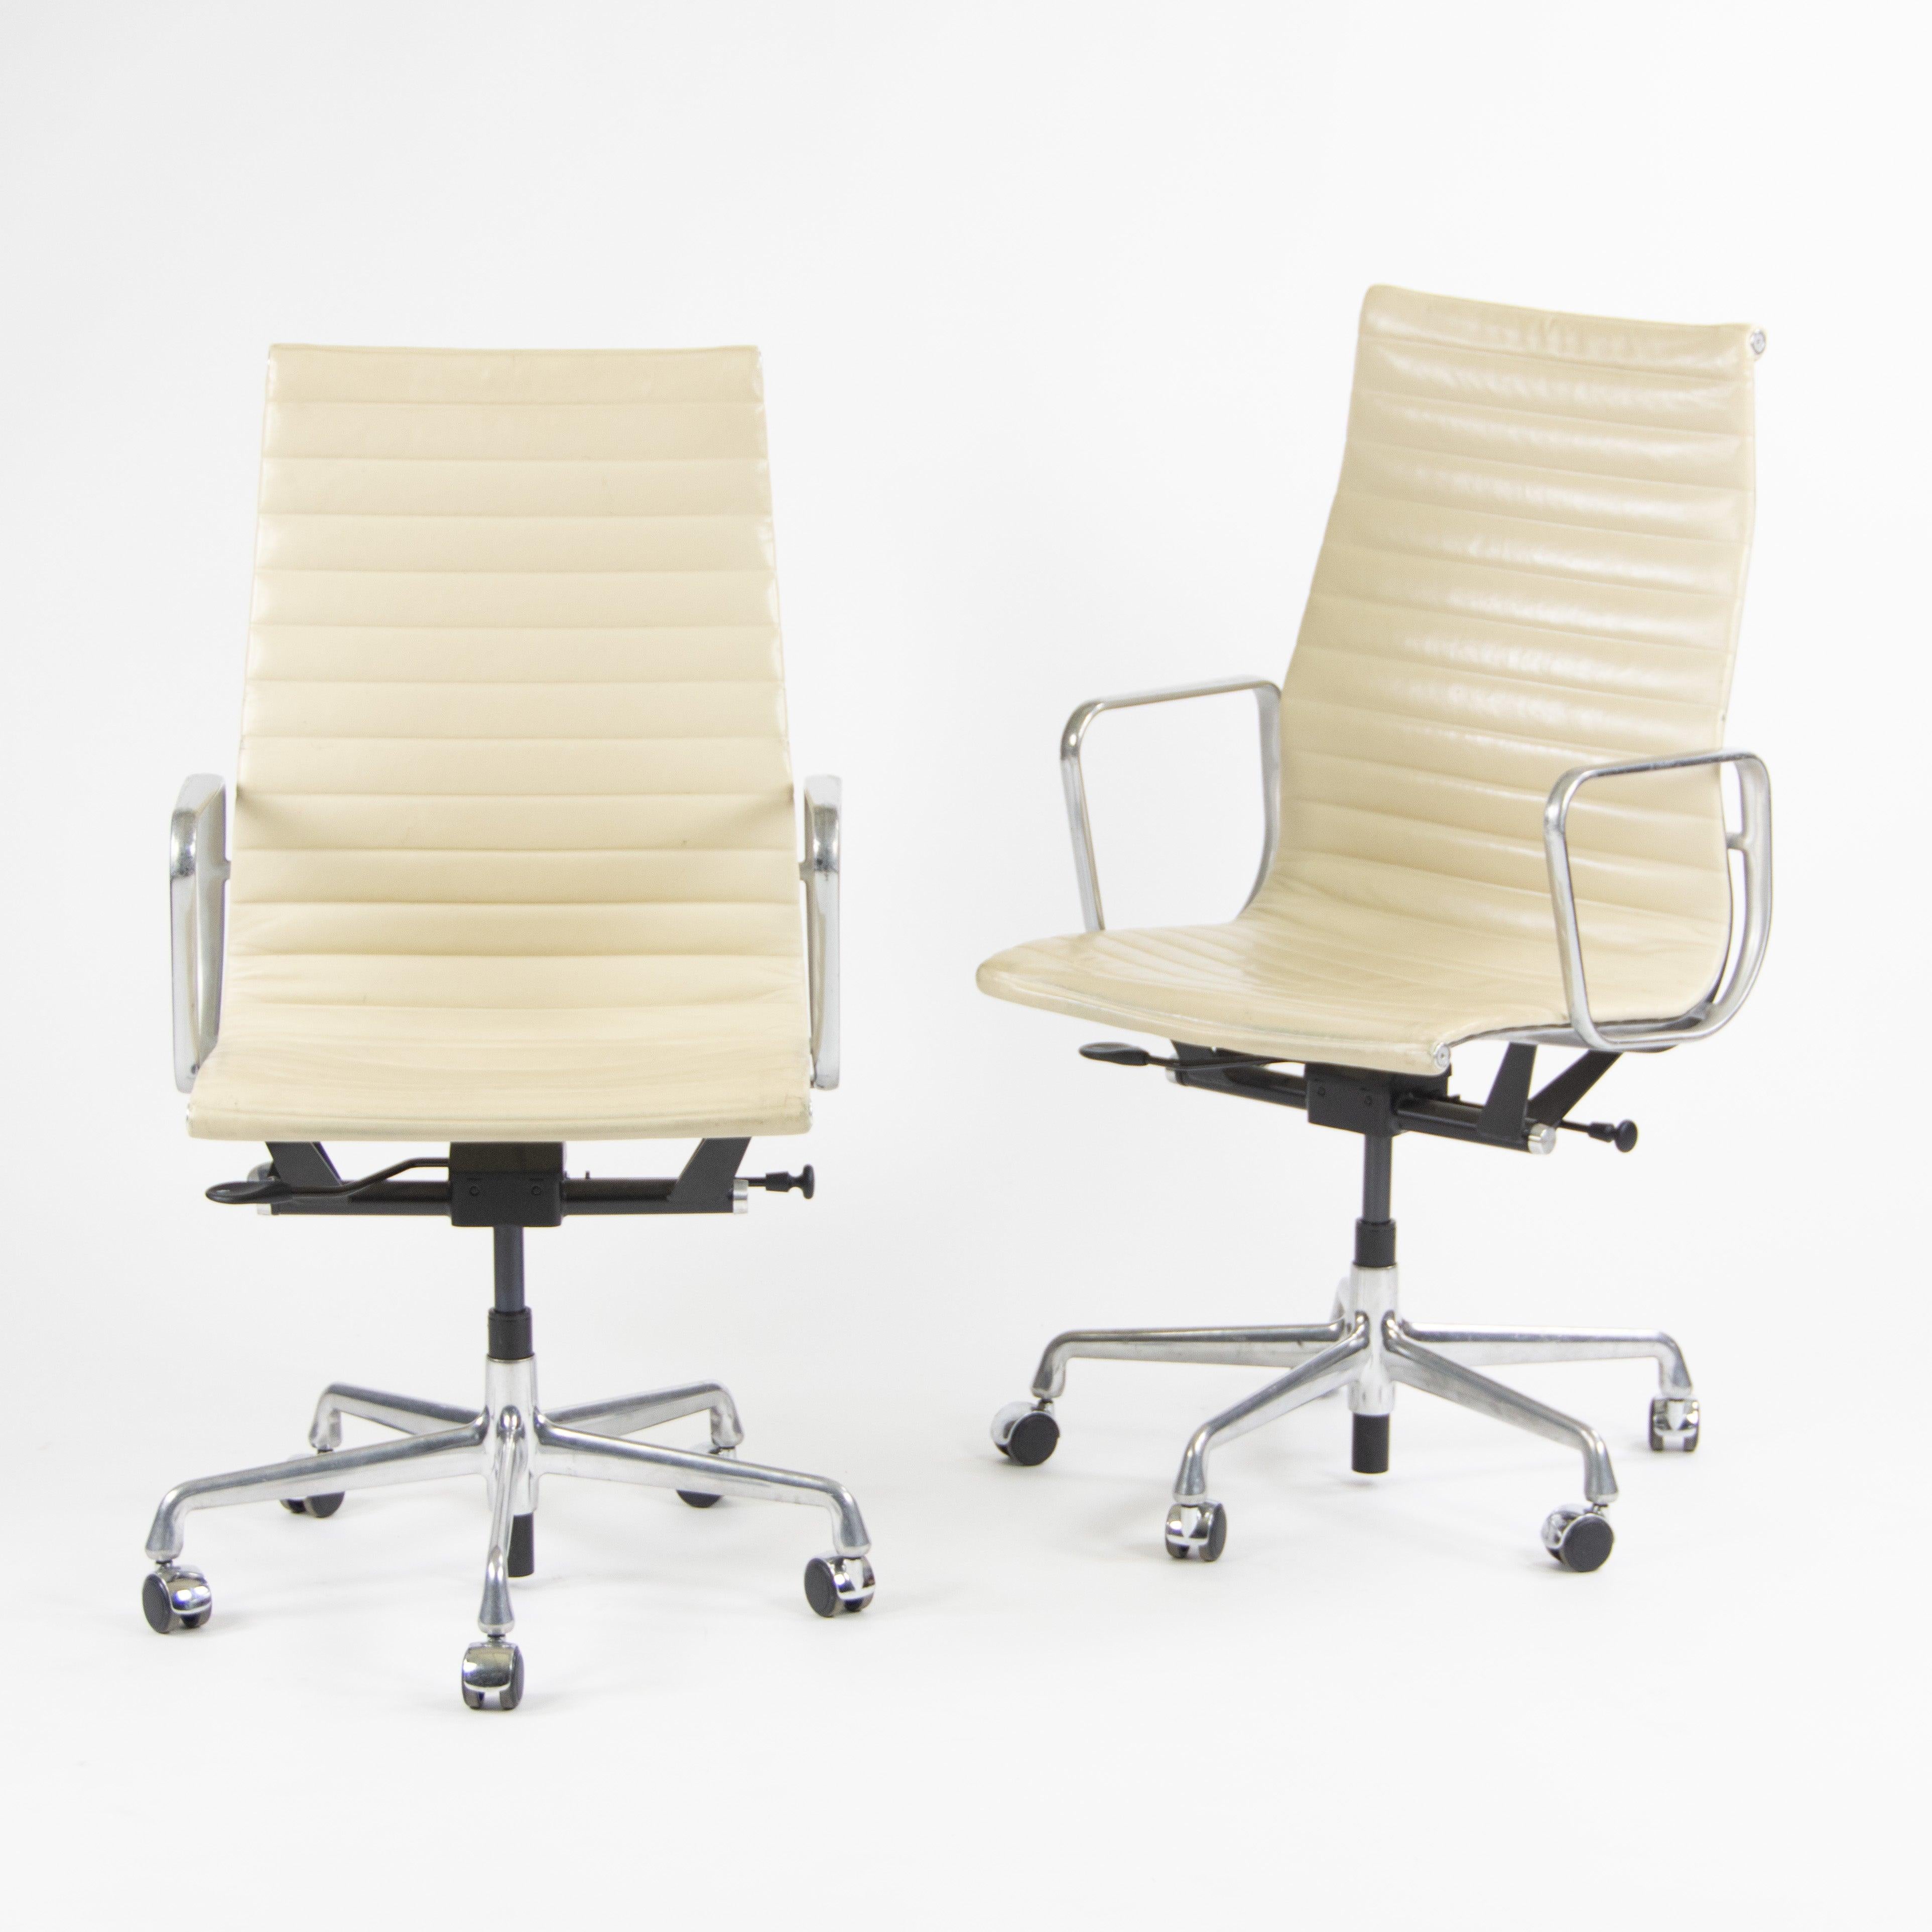 
Listed for sale is a set of (sold separately) Eames Herman Miller aluminum group executive high back desk chairs with ivory/creme leather (off-white) upholstery.These gorgeous chairs came from a corporate environment in Washington, DC.
The leather